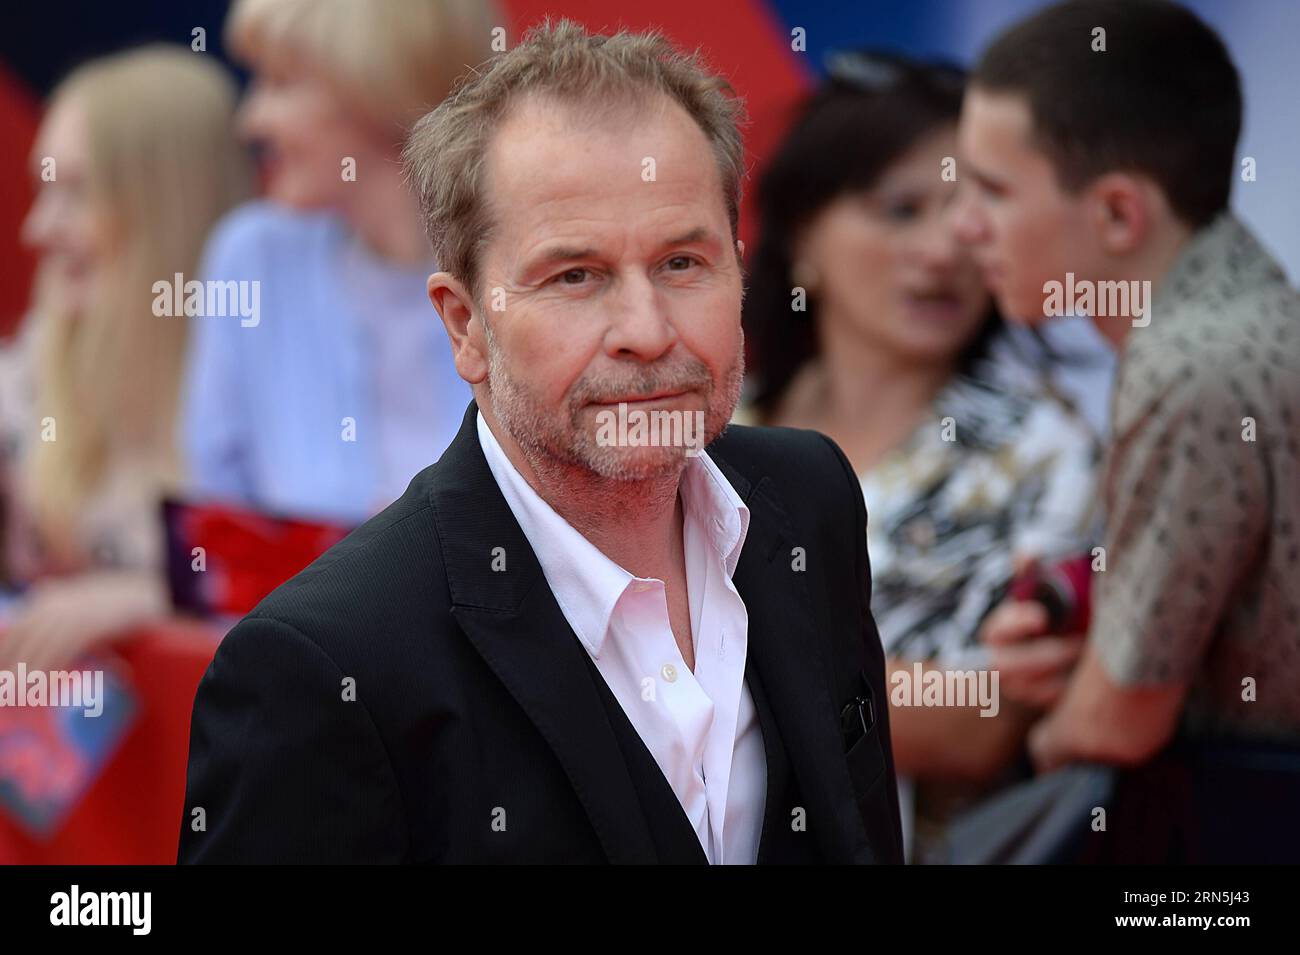 Austrian director Ulrich Seidl attends the closing ceremony of 37th Moscow International Film Festival in Moscow, Russia, June 26, 2015. ) RUSSIA-MOSCOW-FILM FESTIVAL-CLOSING CEREMONY pavelxbednyakov PUBLICATIONxNOTxINxCHN   Austrian Director Ulrich Seidl Attends The CLOSING Ceremony of 37th Moscow International Film Festival in Moscow Russia June 26 2015 Russia Moscow Film Festival CLOSING Ceremony PavelxBednyakov PUBLICATIONxNOTxINxCHN Stock Photo